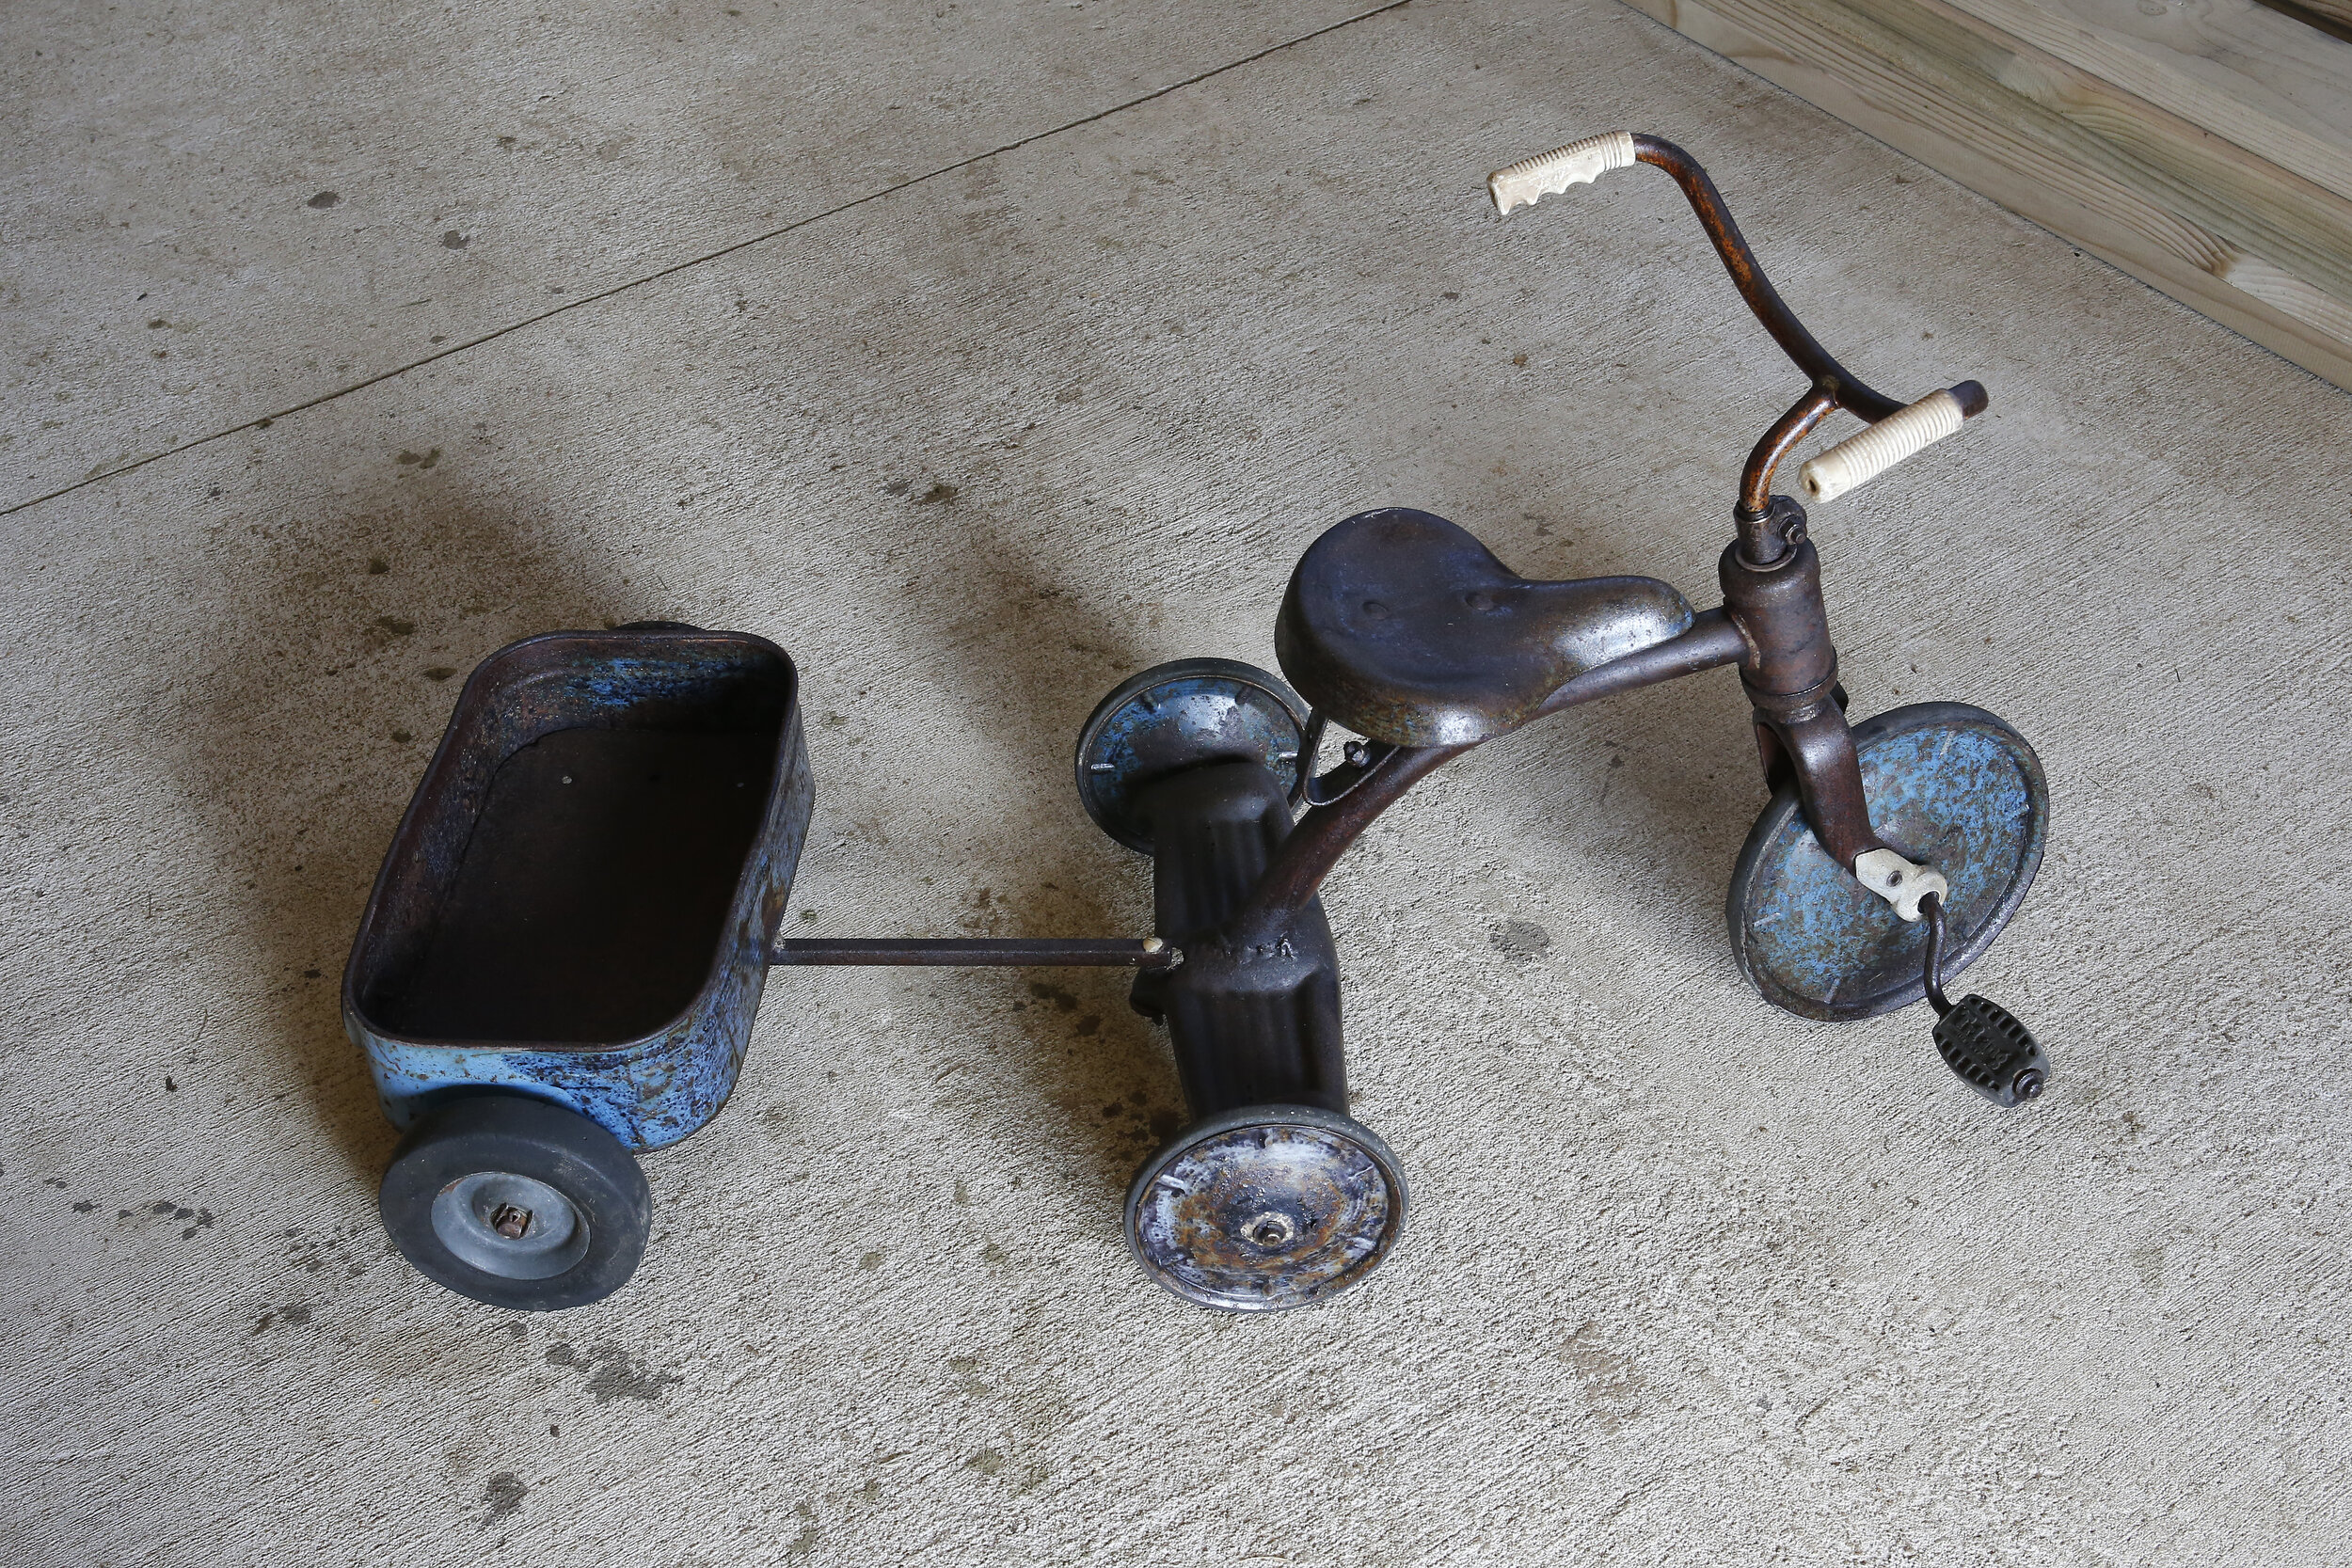 A trike and trailer from Gary’s collection